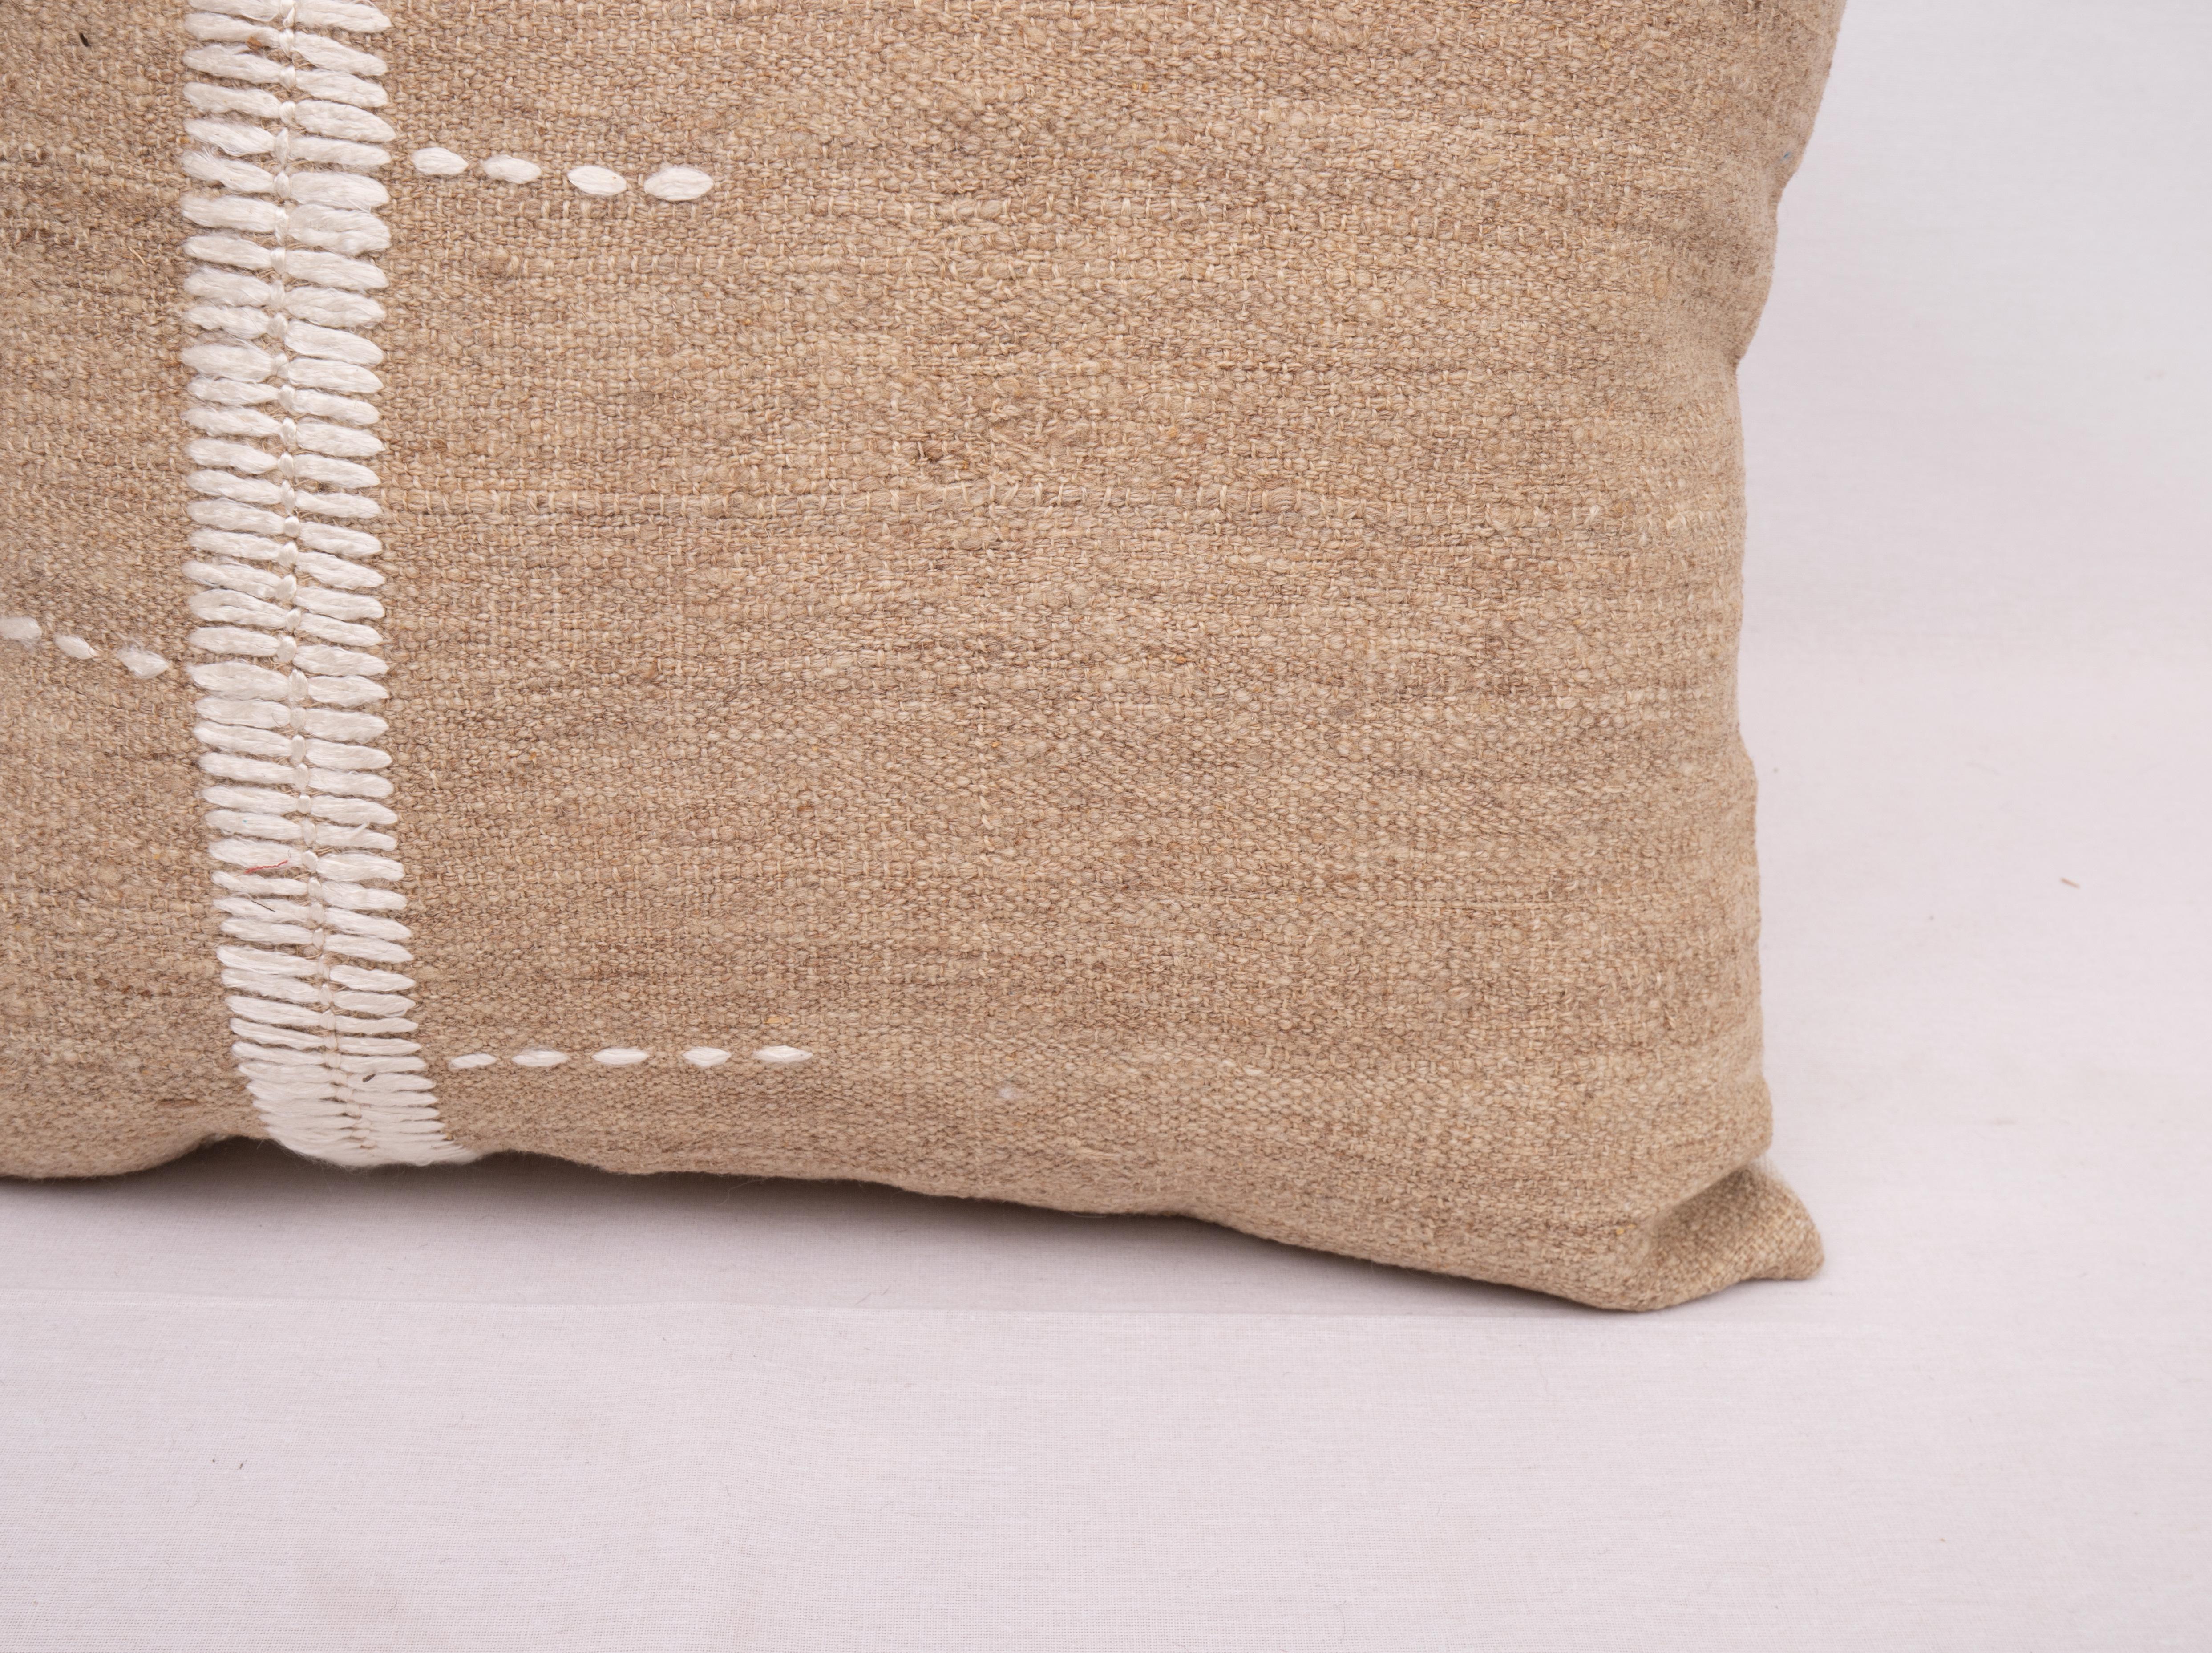 Turkish Rustic Pillow Case Made from a Vintage Un-Dyed Wool Coverlet, Mid 20th C